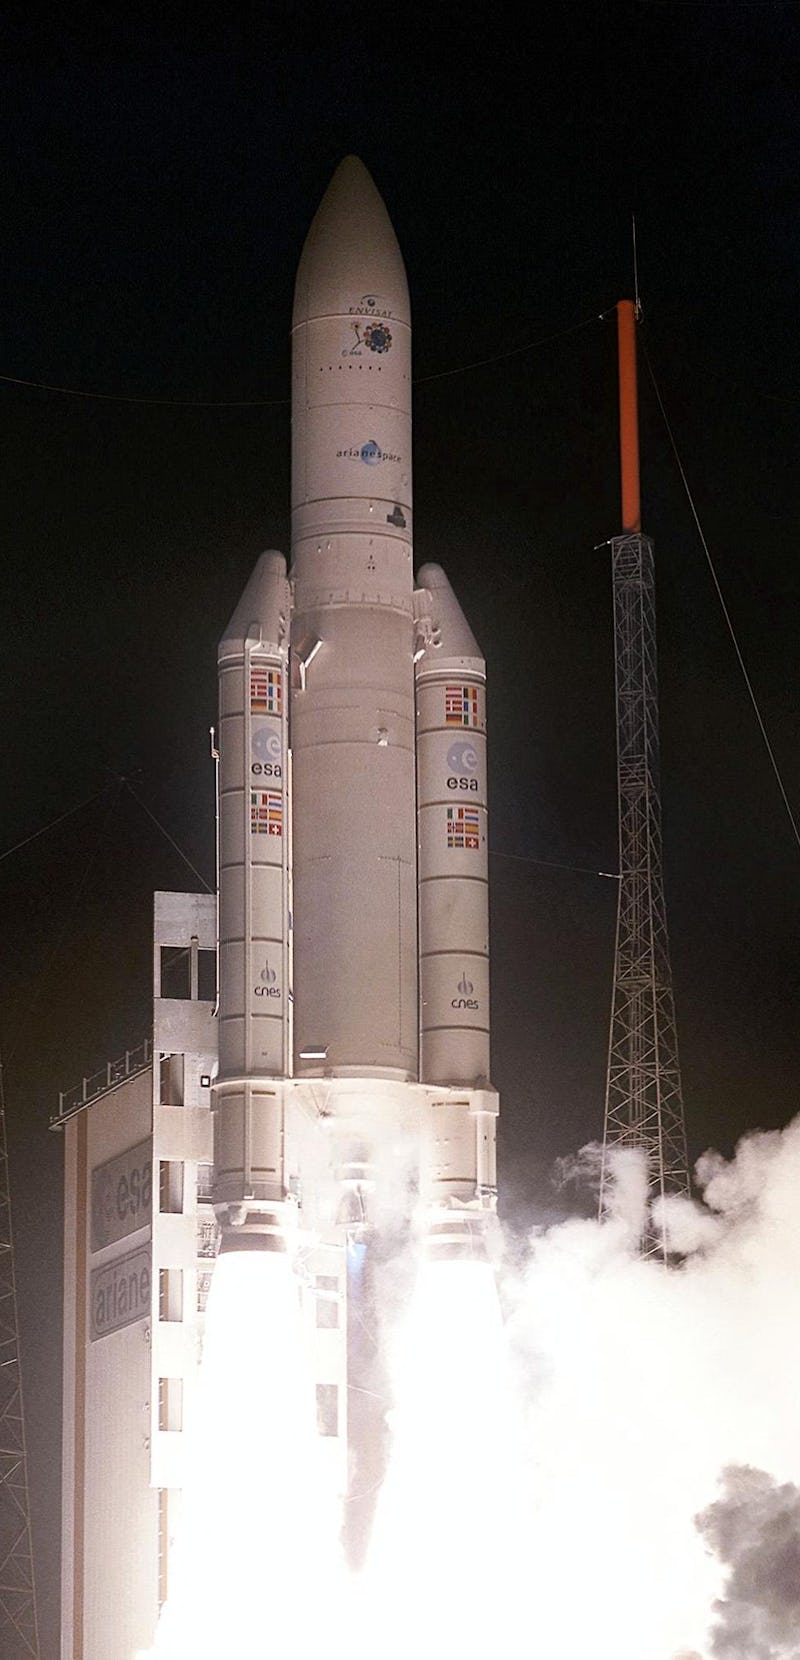 Europe's powerful Ariane-5 rocket is launched 28 February 2002 from Kourou' space center, French Guy...